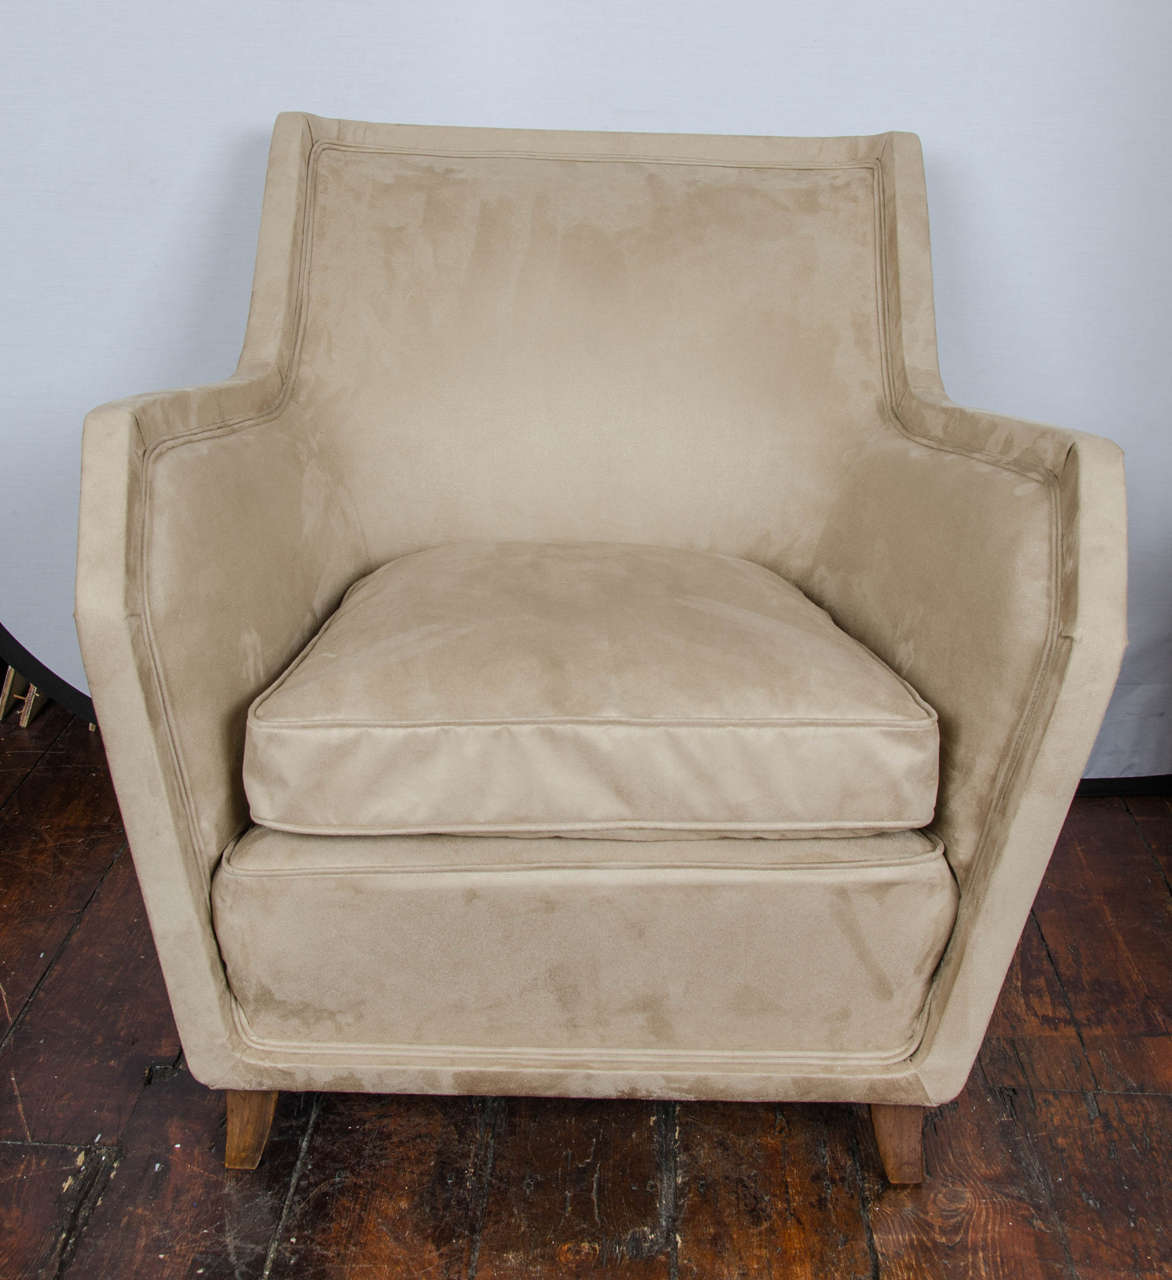 1935-1940 pair of Italian armchairs in fake suede.